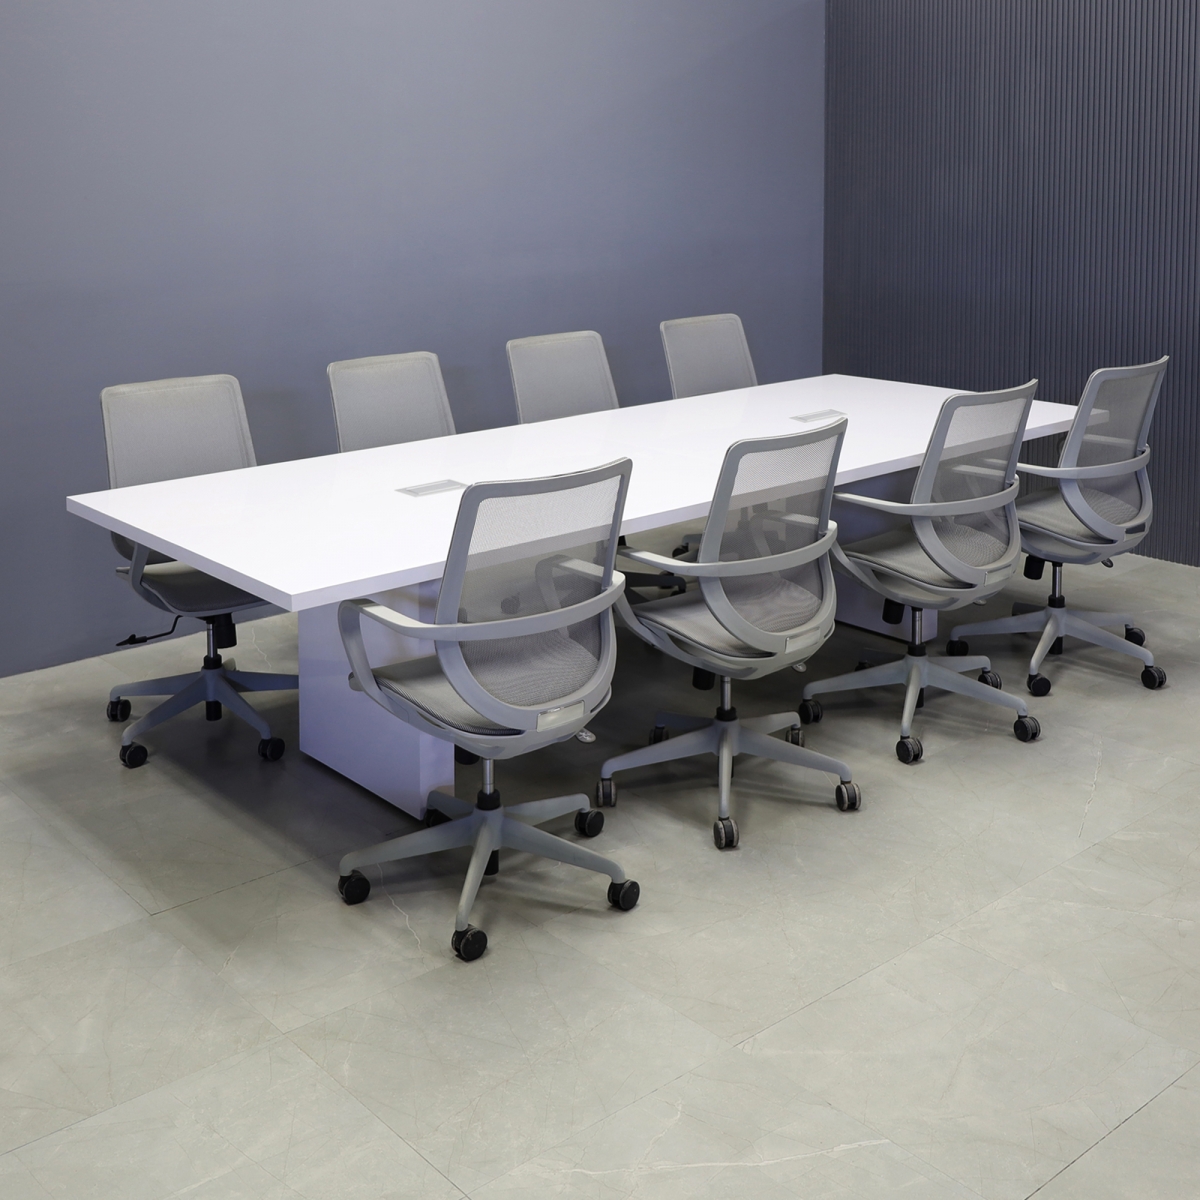 Newton Rectangular Shape Conference Table in White Gloss Laminate - 120 In. - Stock #45